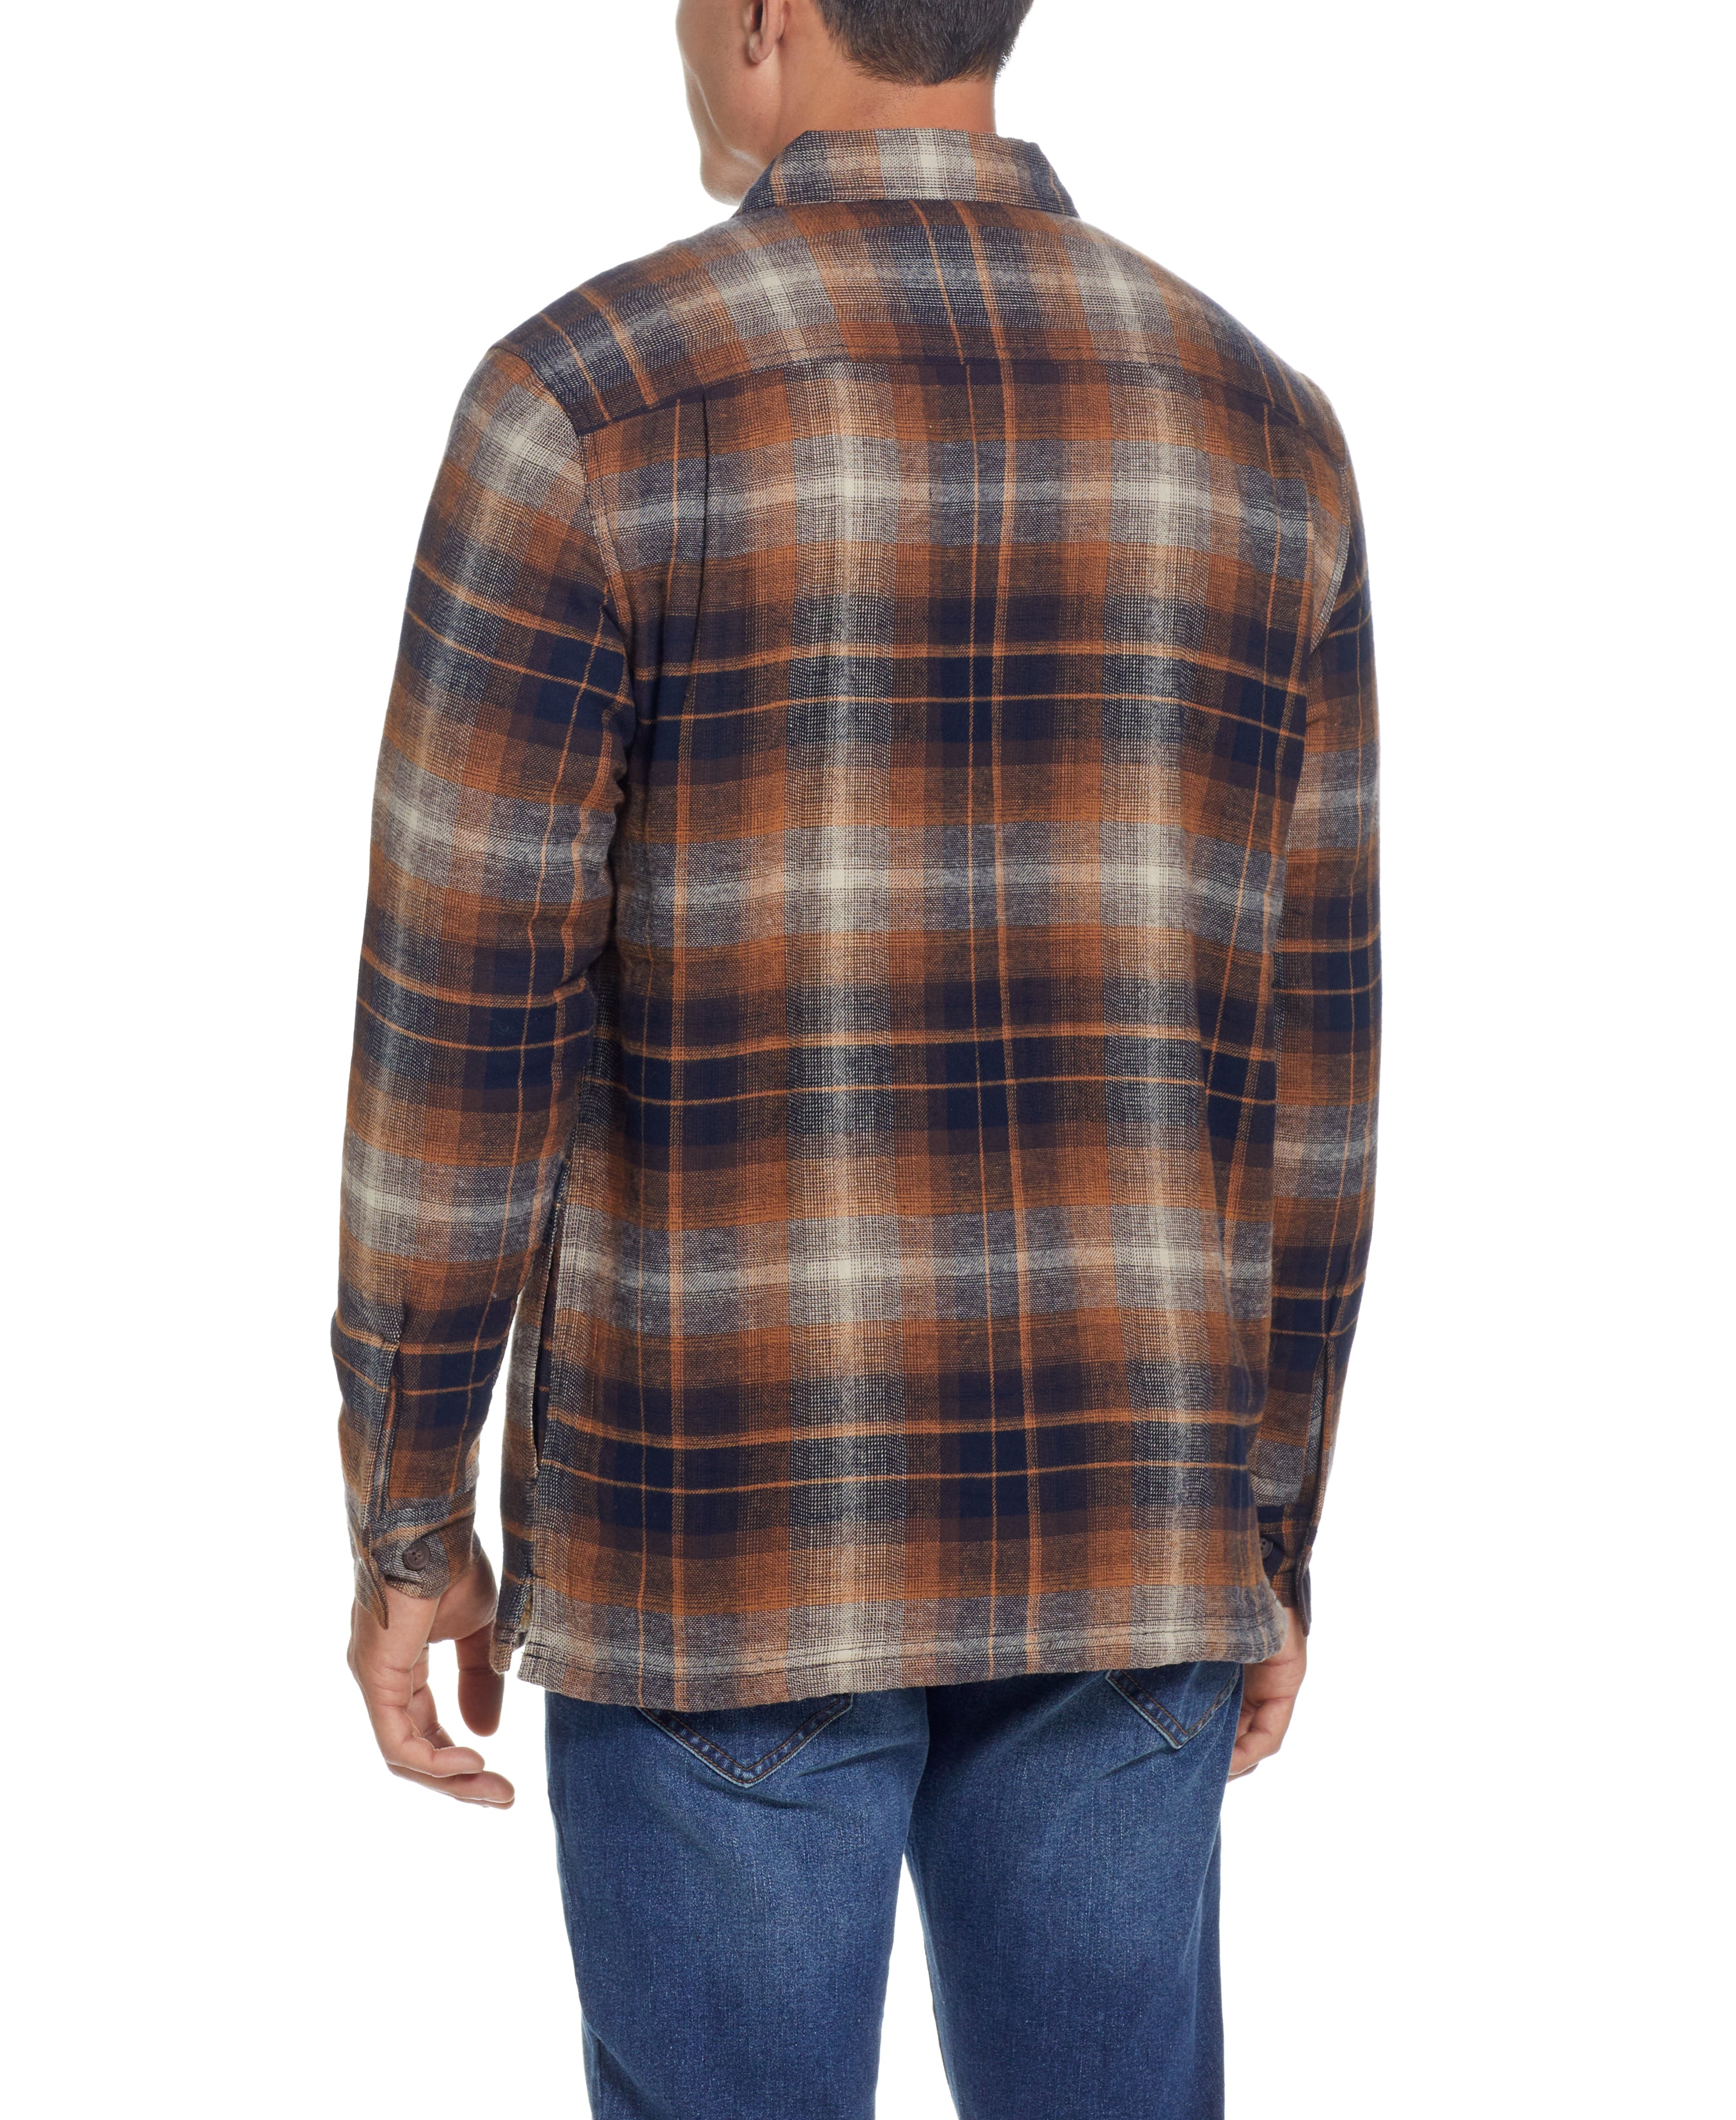 SHERPA LINED SHIRT JACKET IN CHILI OIL